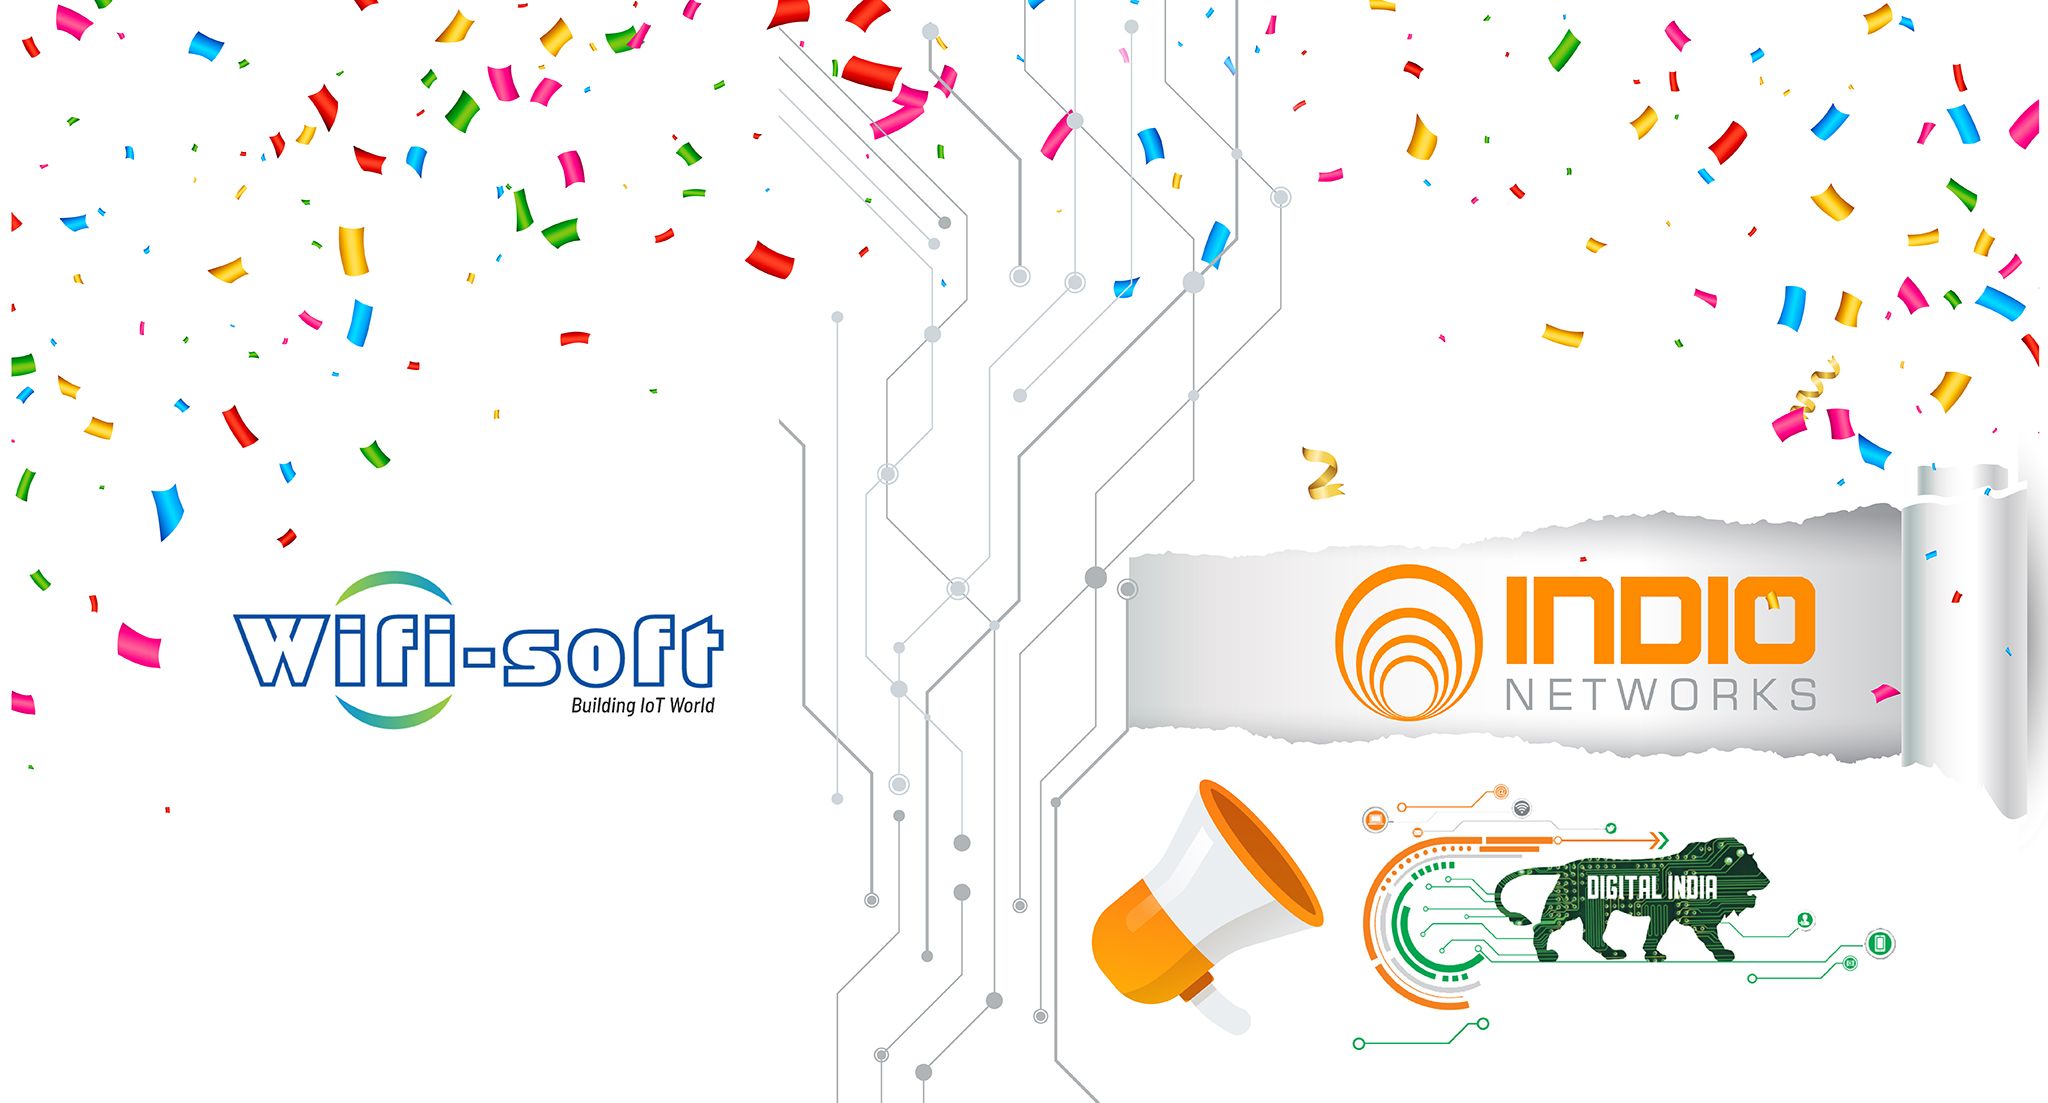 Wifisoft Solutions is now Indio Networks